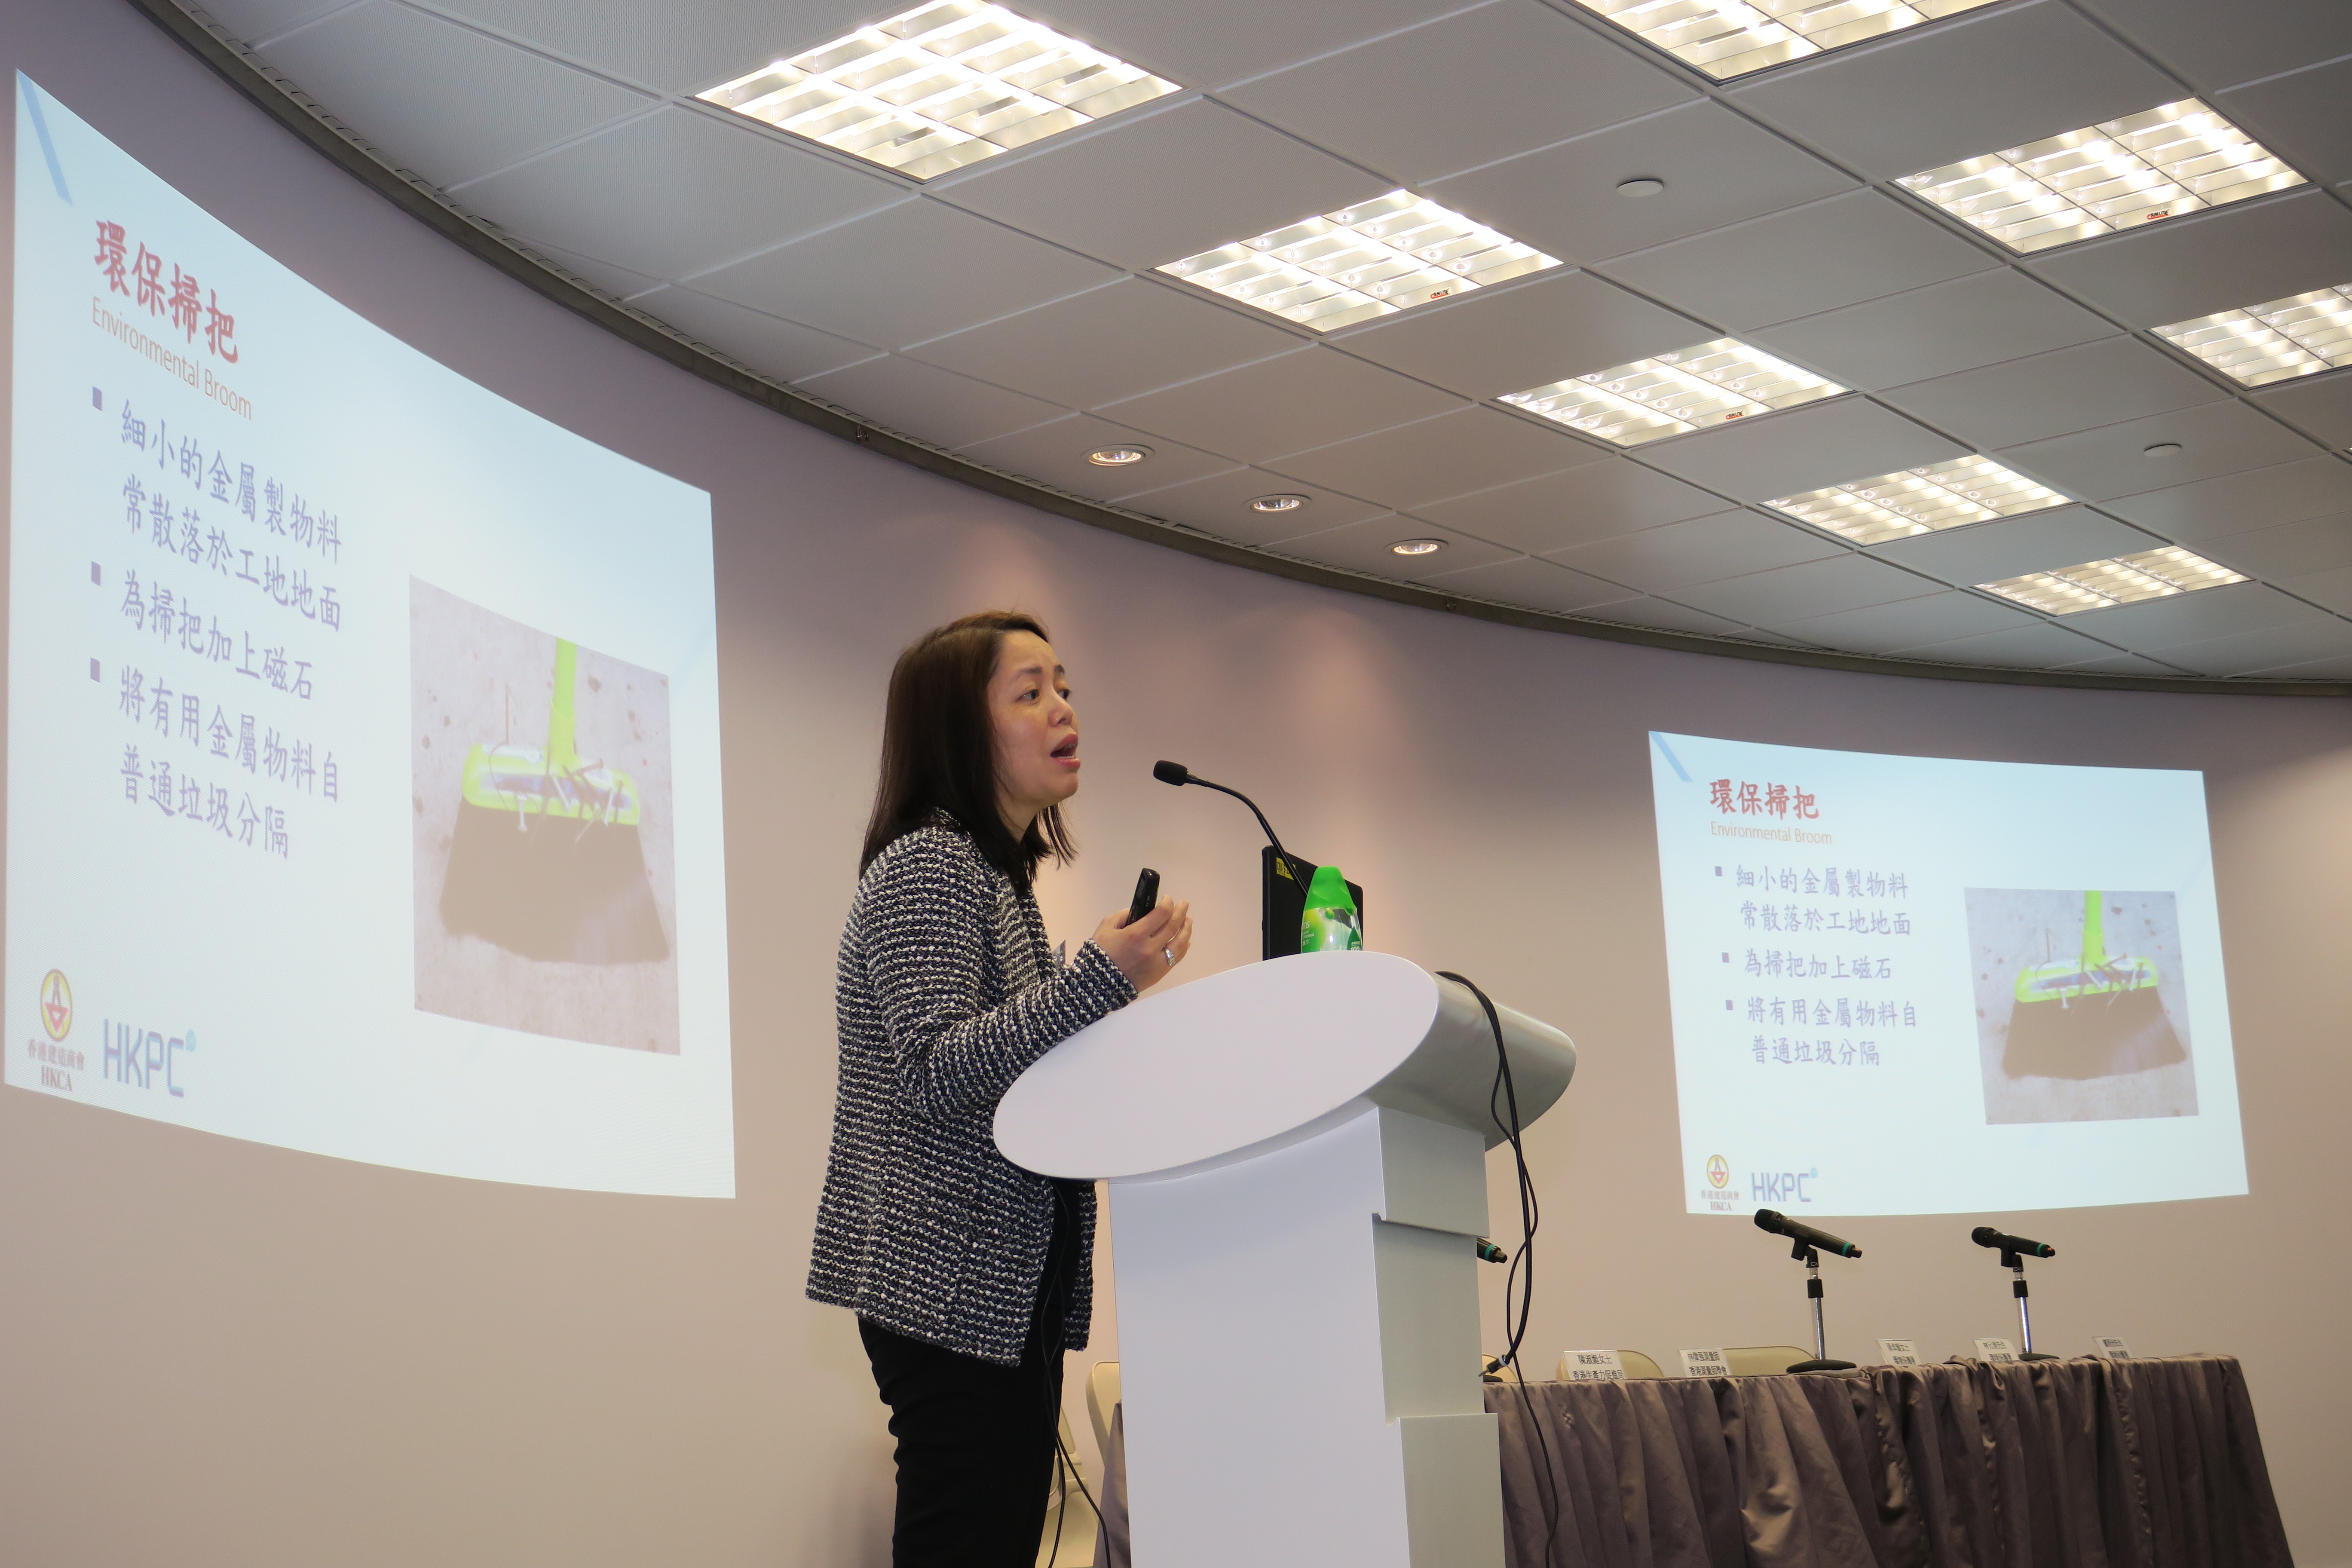 MS. JESSICA CHAN REPRESENTING THE HKCA INTRODUCED THE INNOVATIVE GREEN ENVIRONMENTAL PRACTICES FOR CONSTRUCTION WORKS. 。